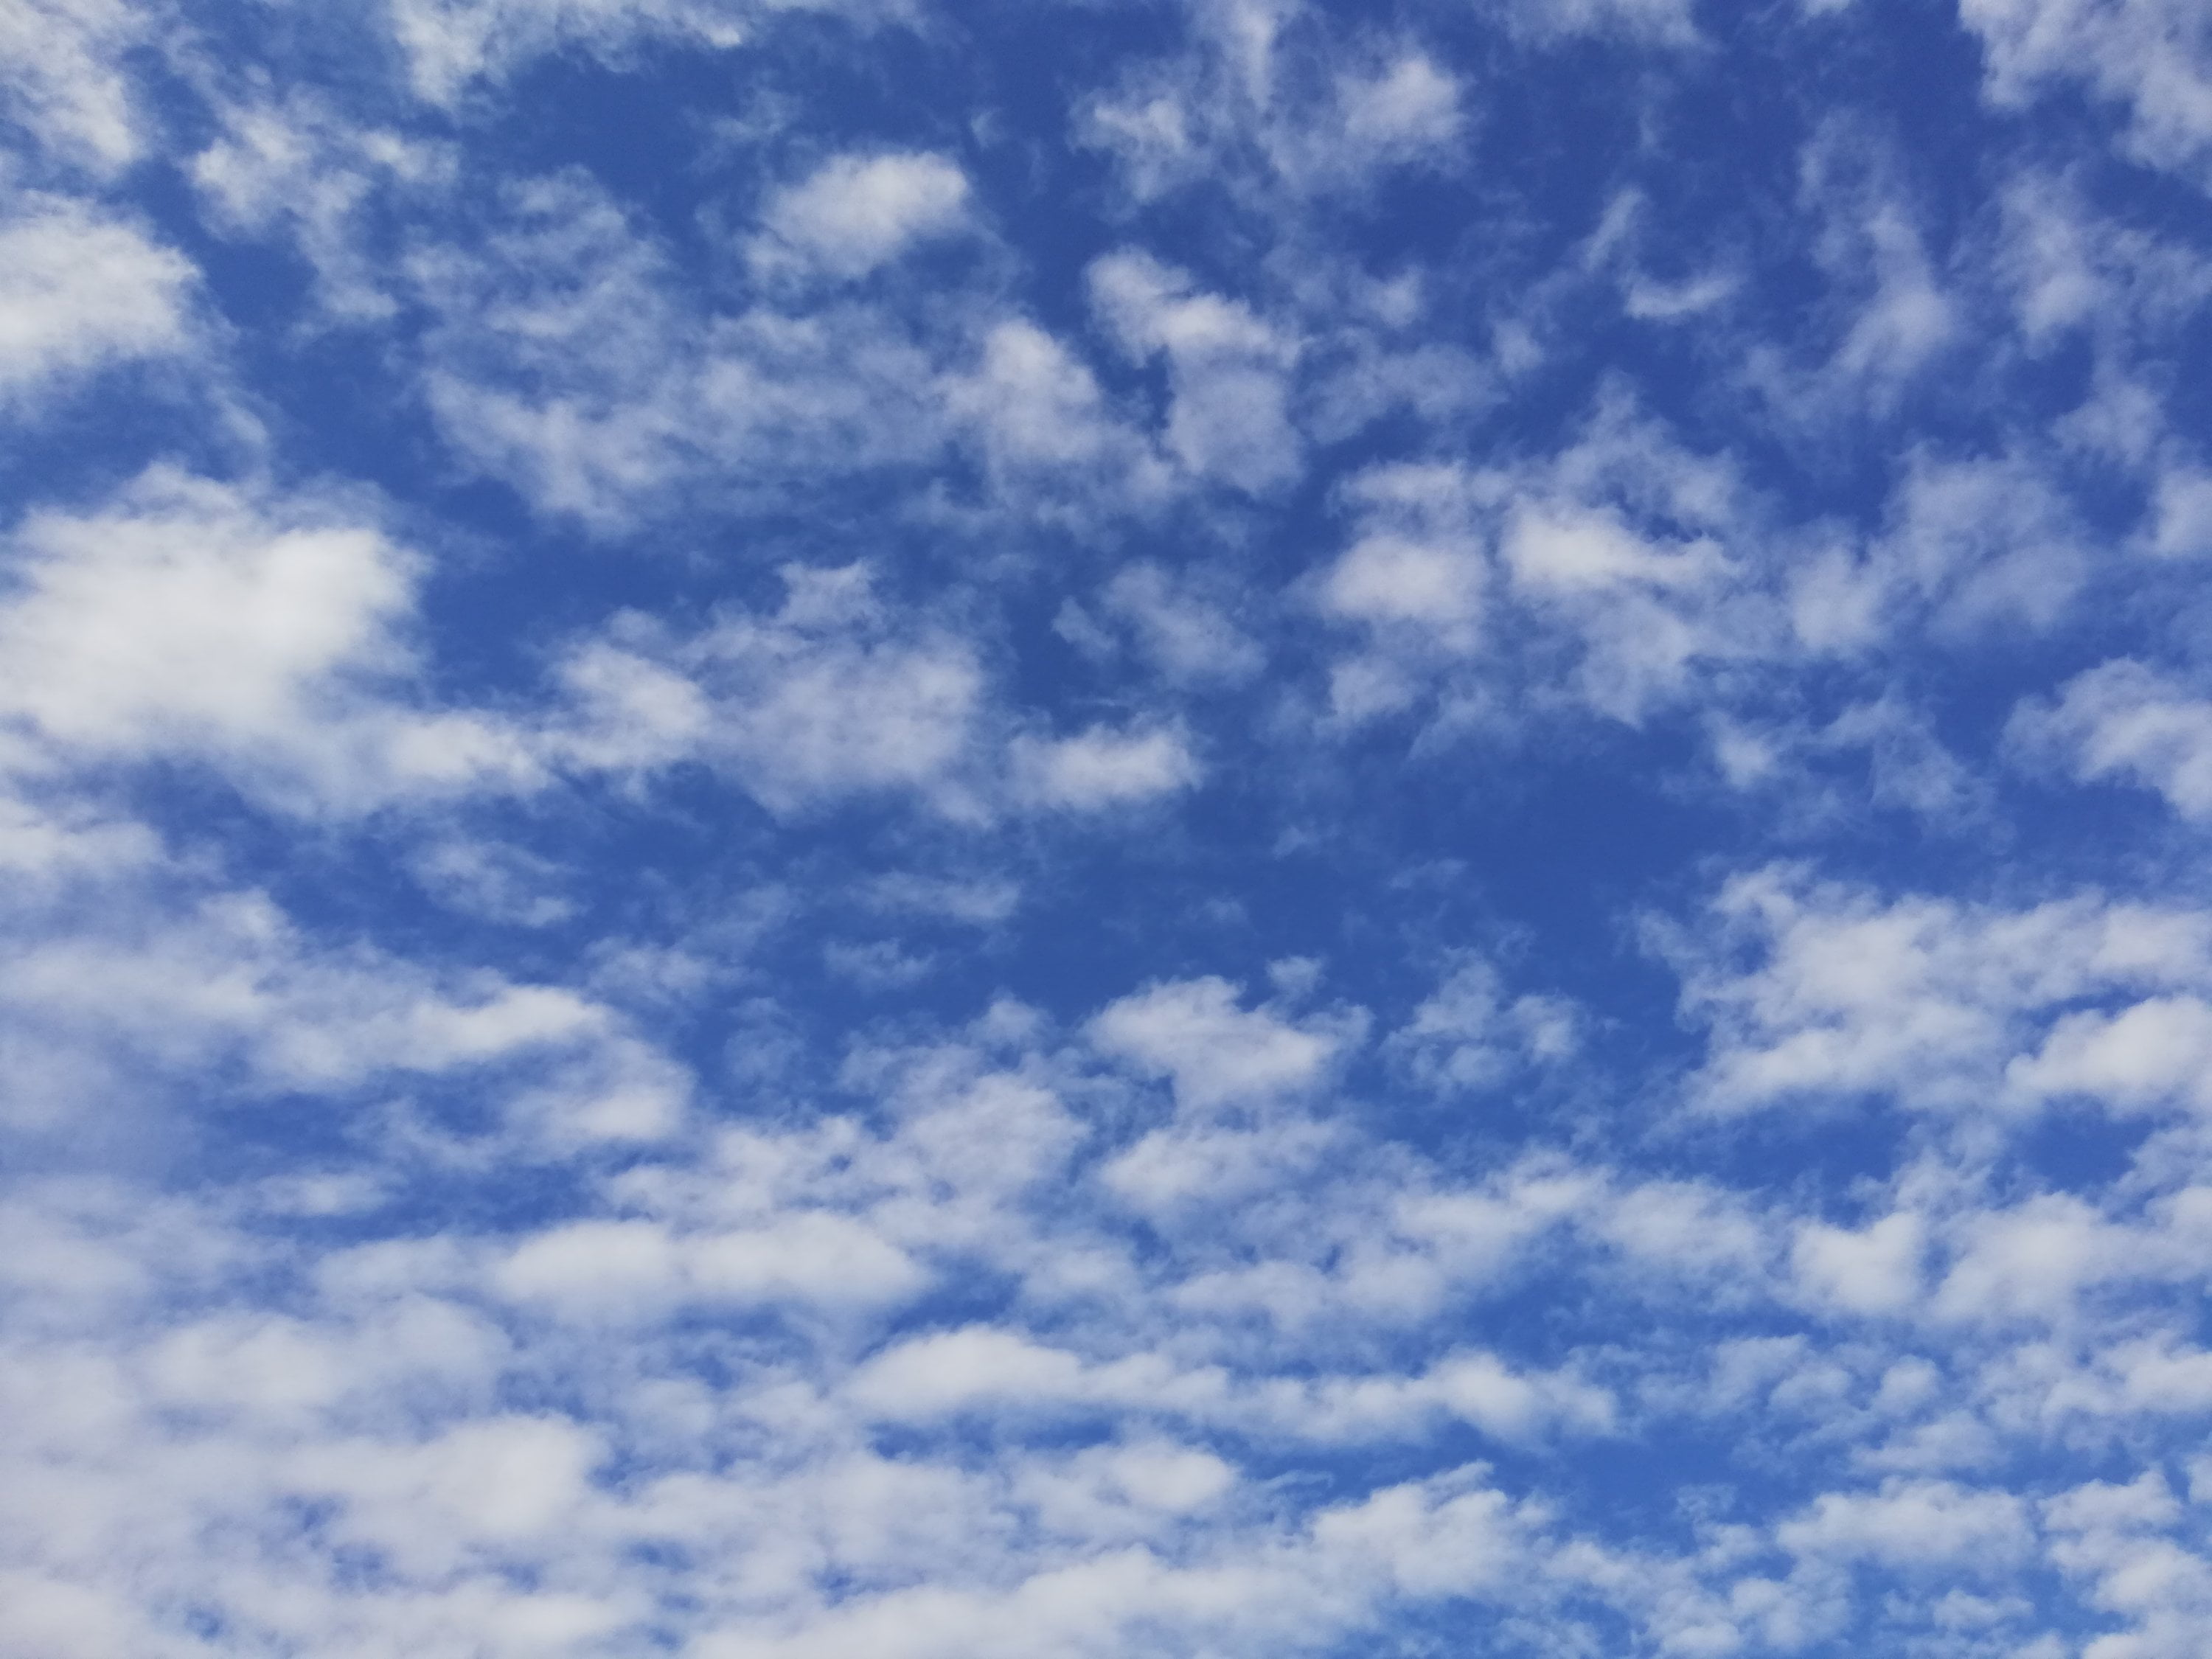 Wallpaper screen cover photo sky with clouds